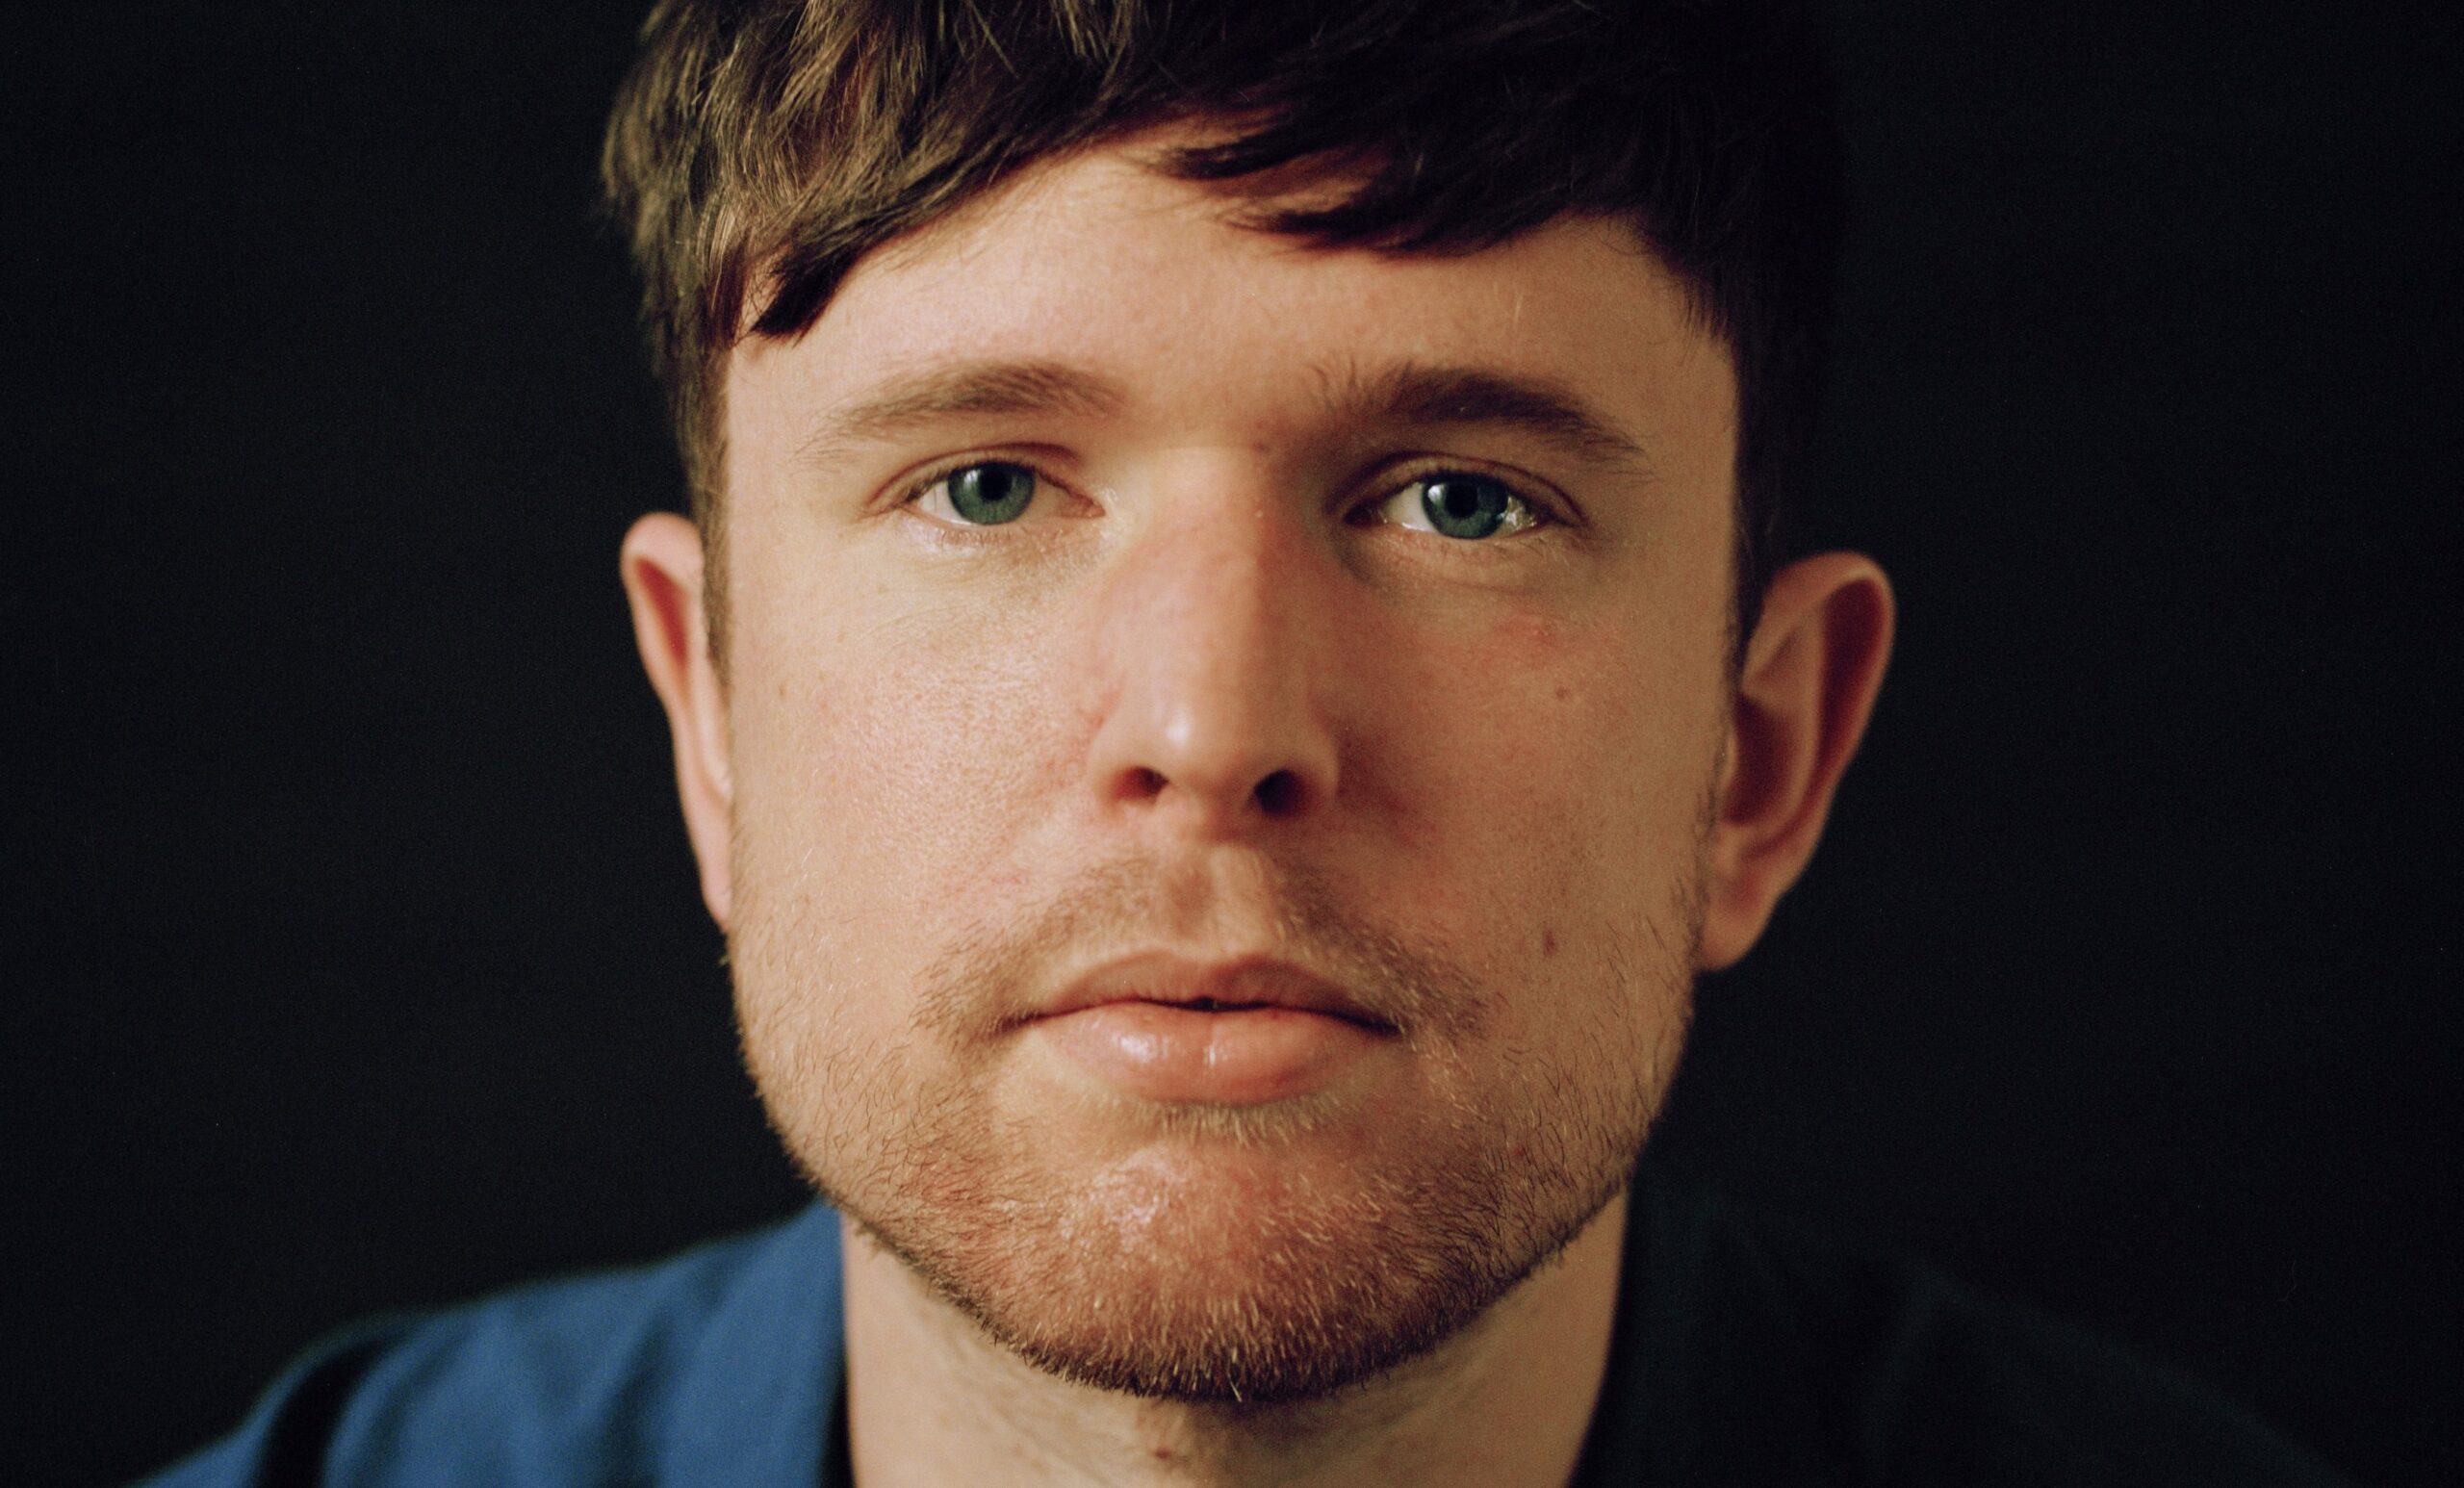 JAMES BLAKE MELBOURNE SHOW SOLD-OUT SECOND SHOW ADDED